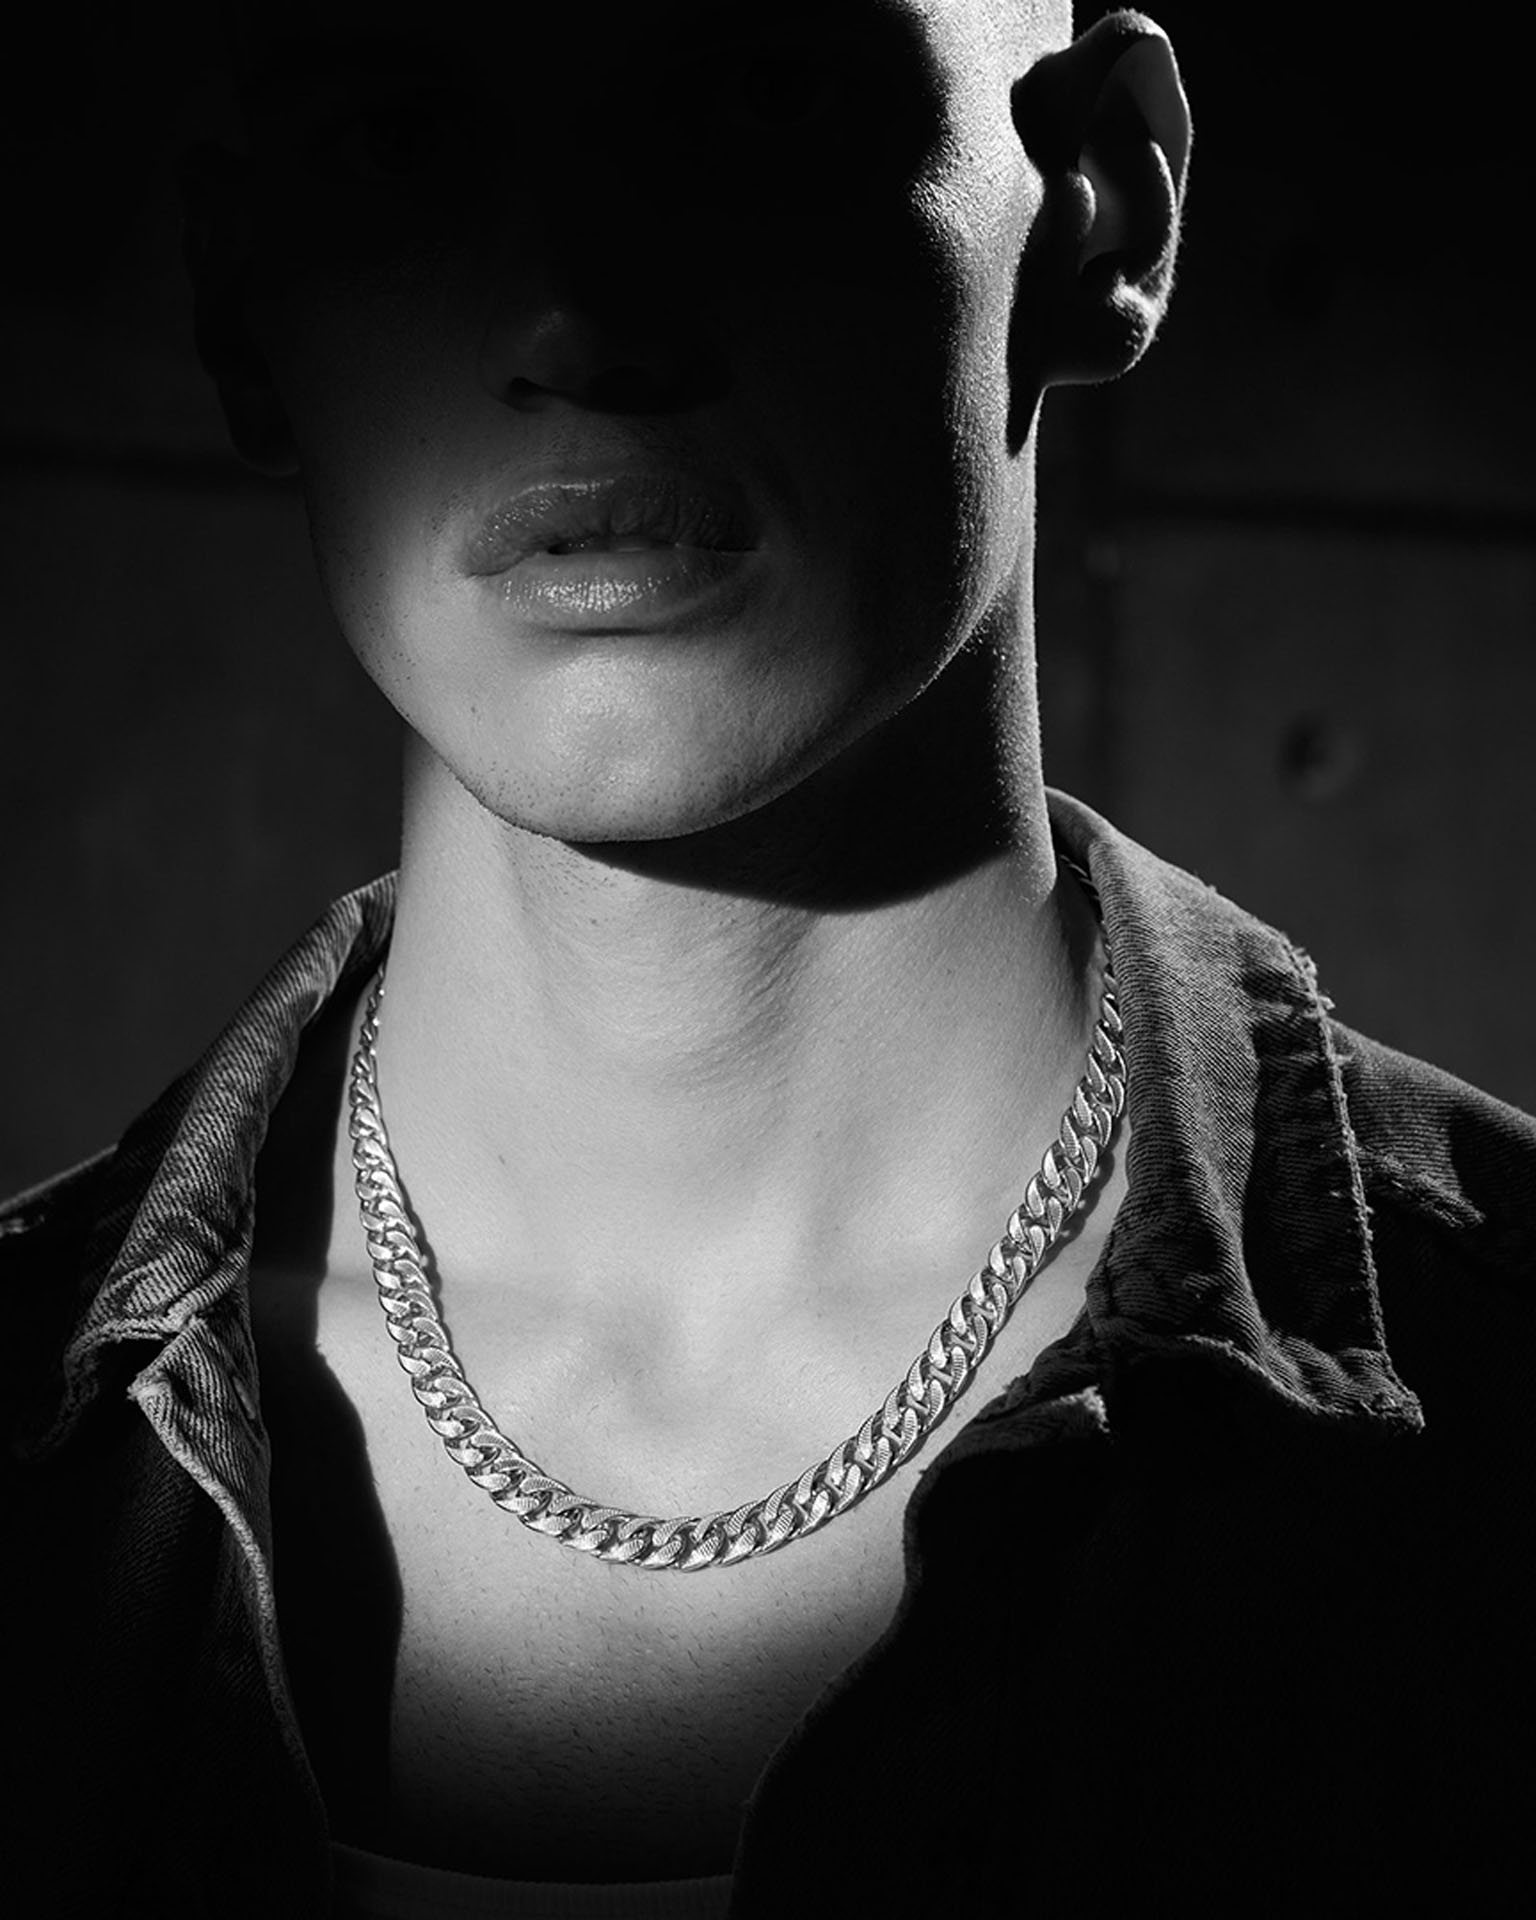 Model Noah Gamma portrayed by David Hatters for Zancan Gioielli. A strong black and white photo with a light spot on the neck to enlighten the necklace jewel.